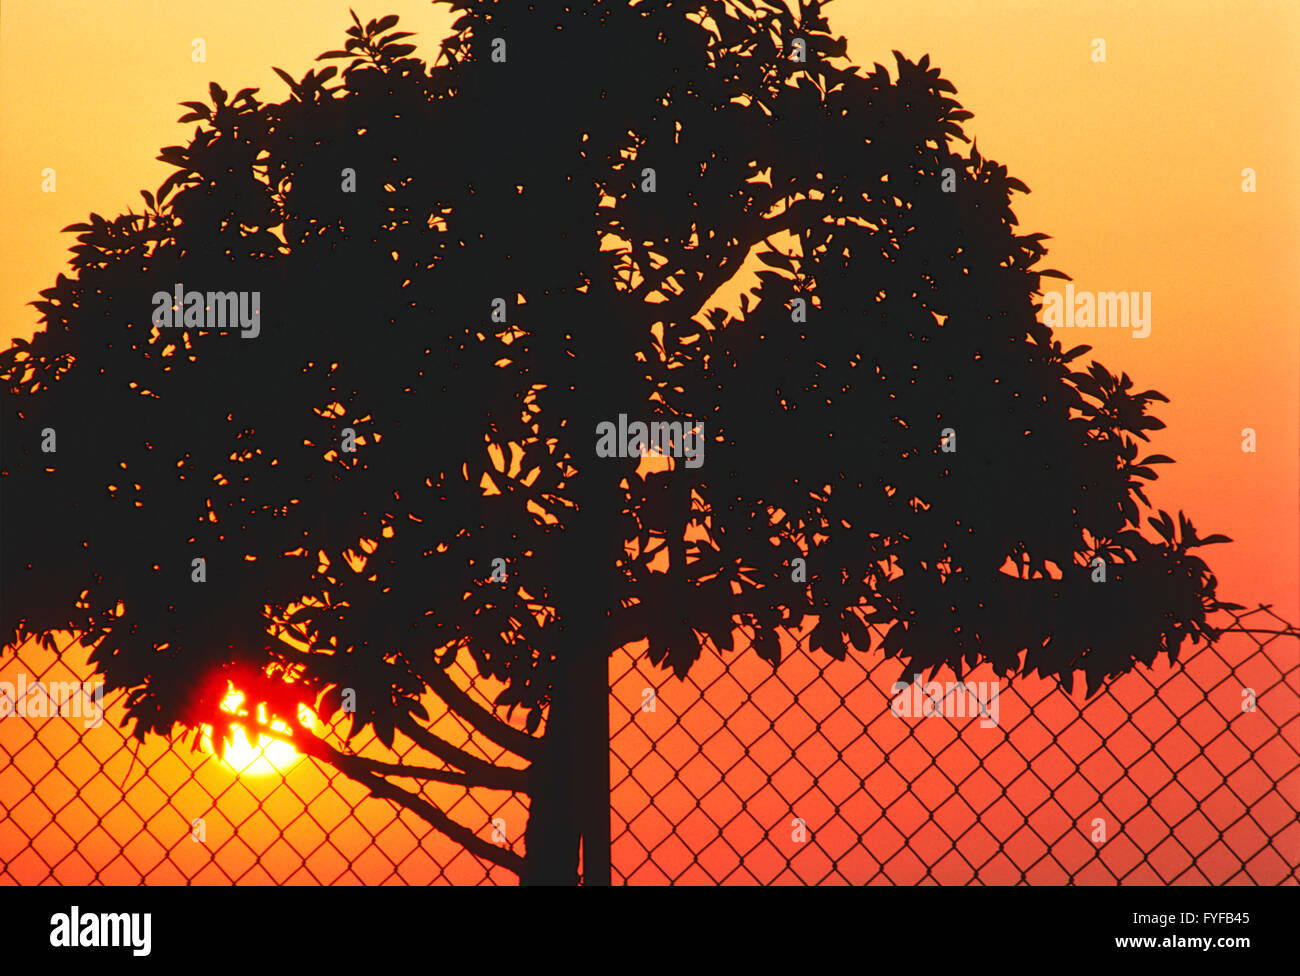 Abstract silhouette view of cyclone fence & tree against setting sun and orange sky Stock Photo